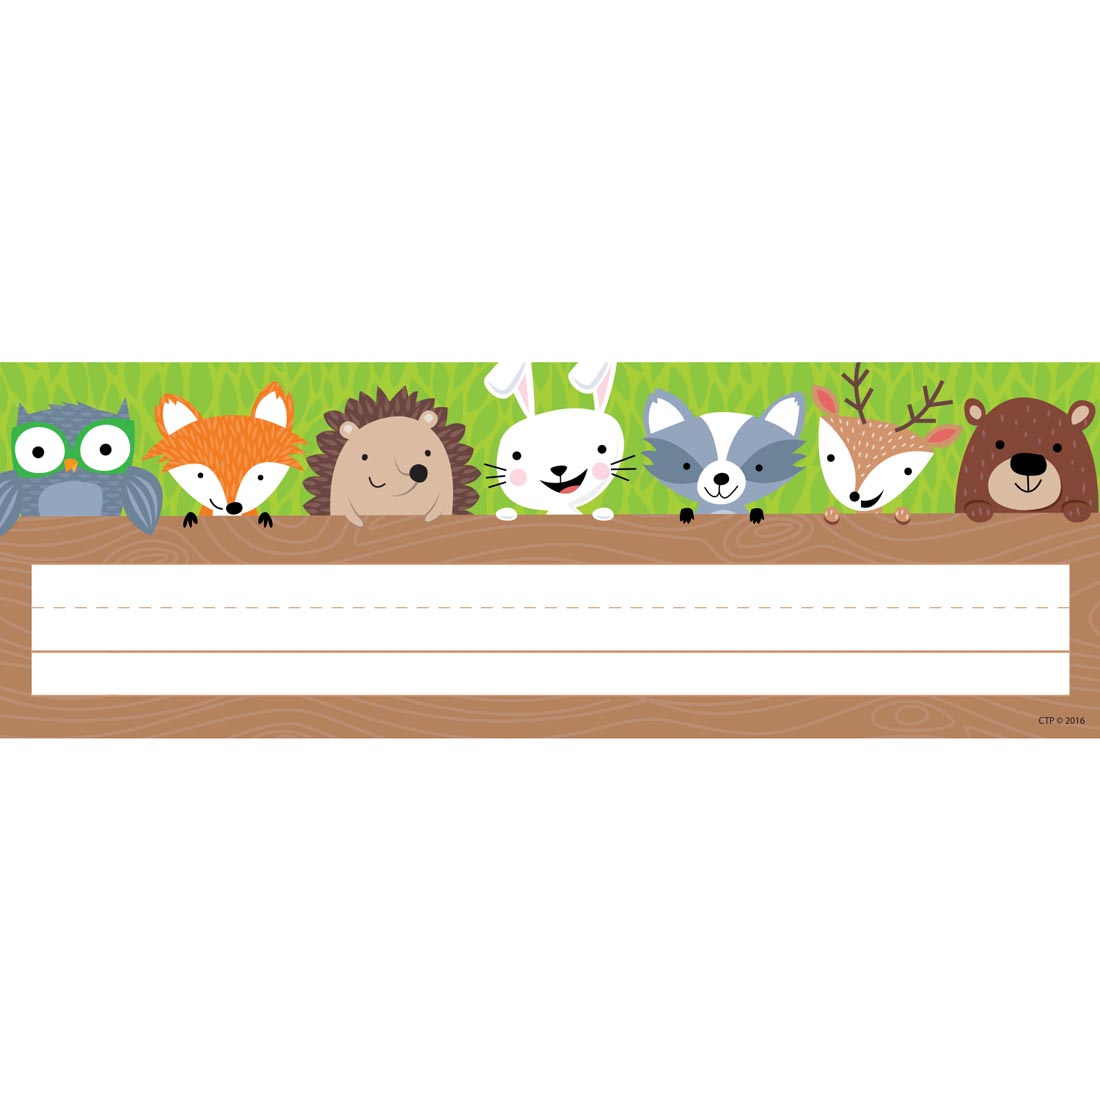 Woodland Friends Name Plate by Creative Teaching Press